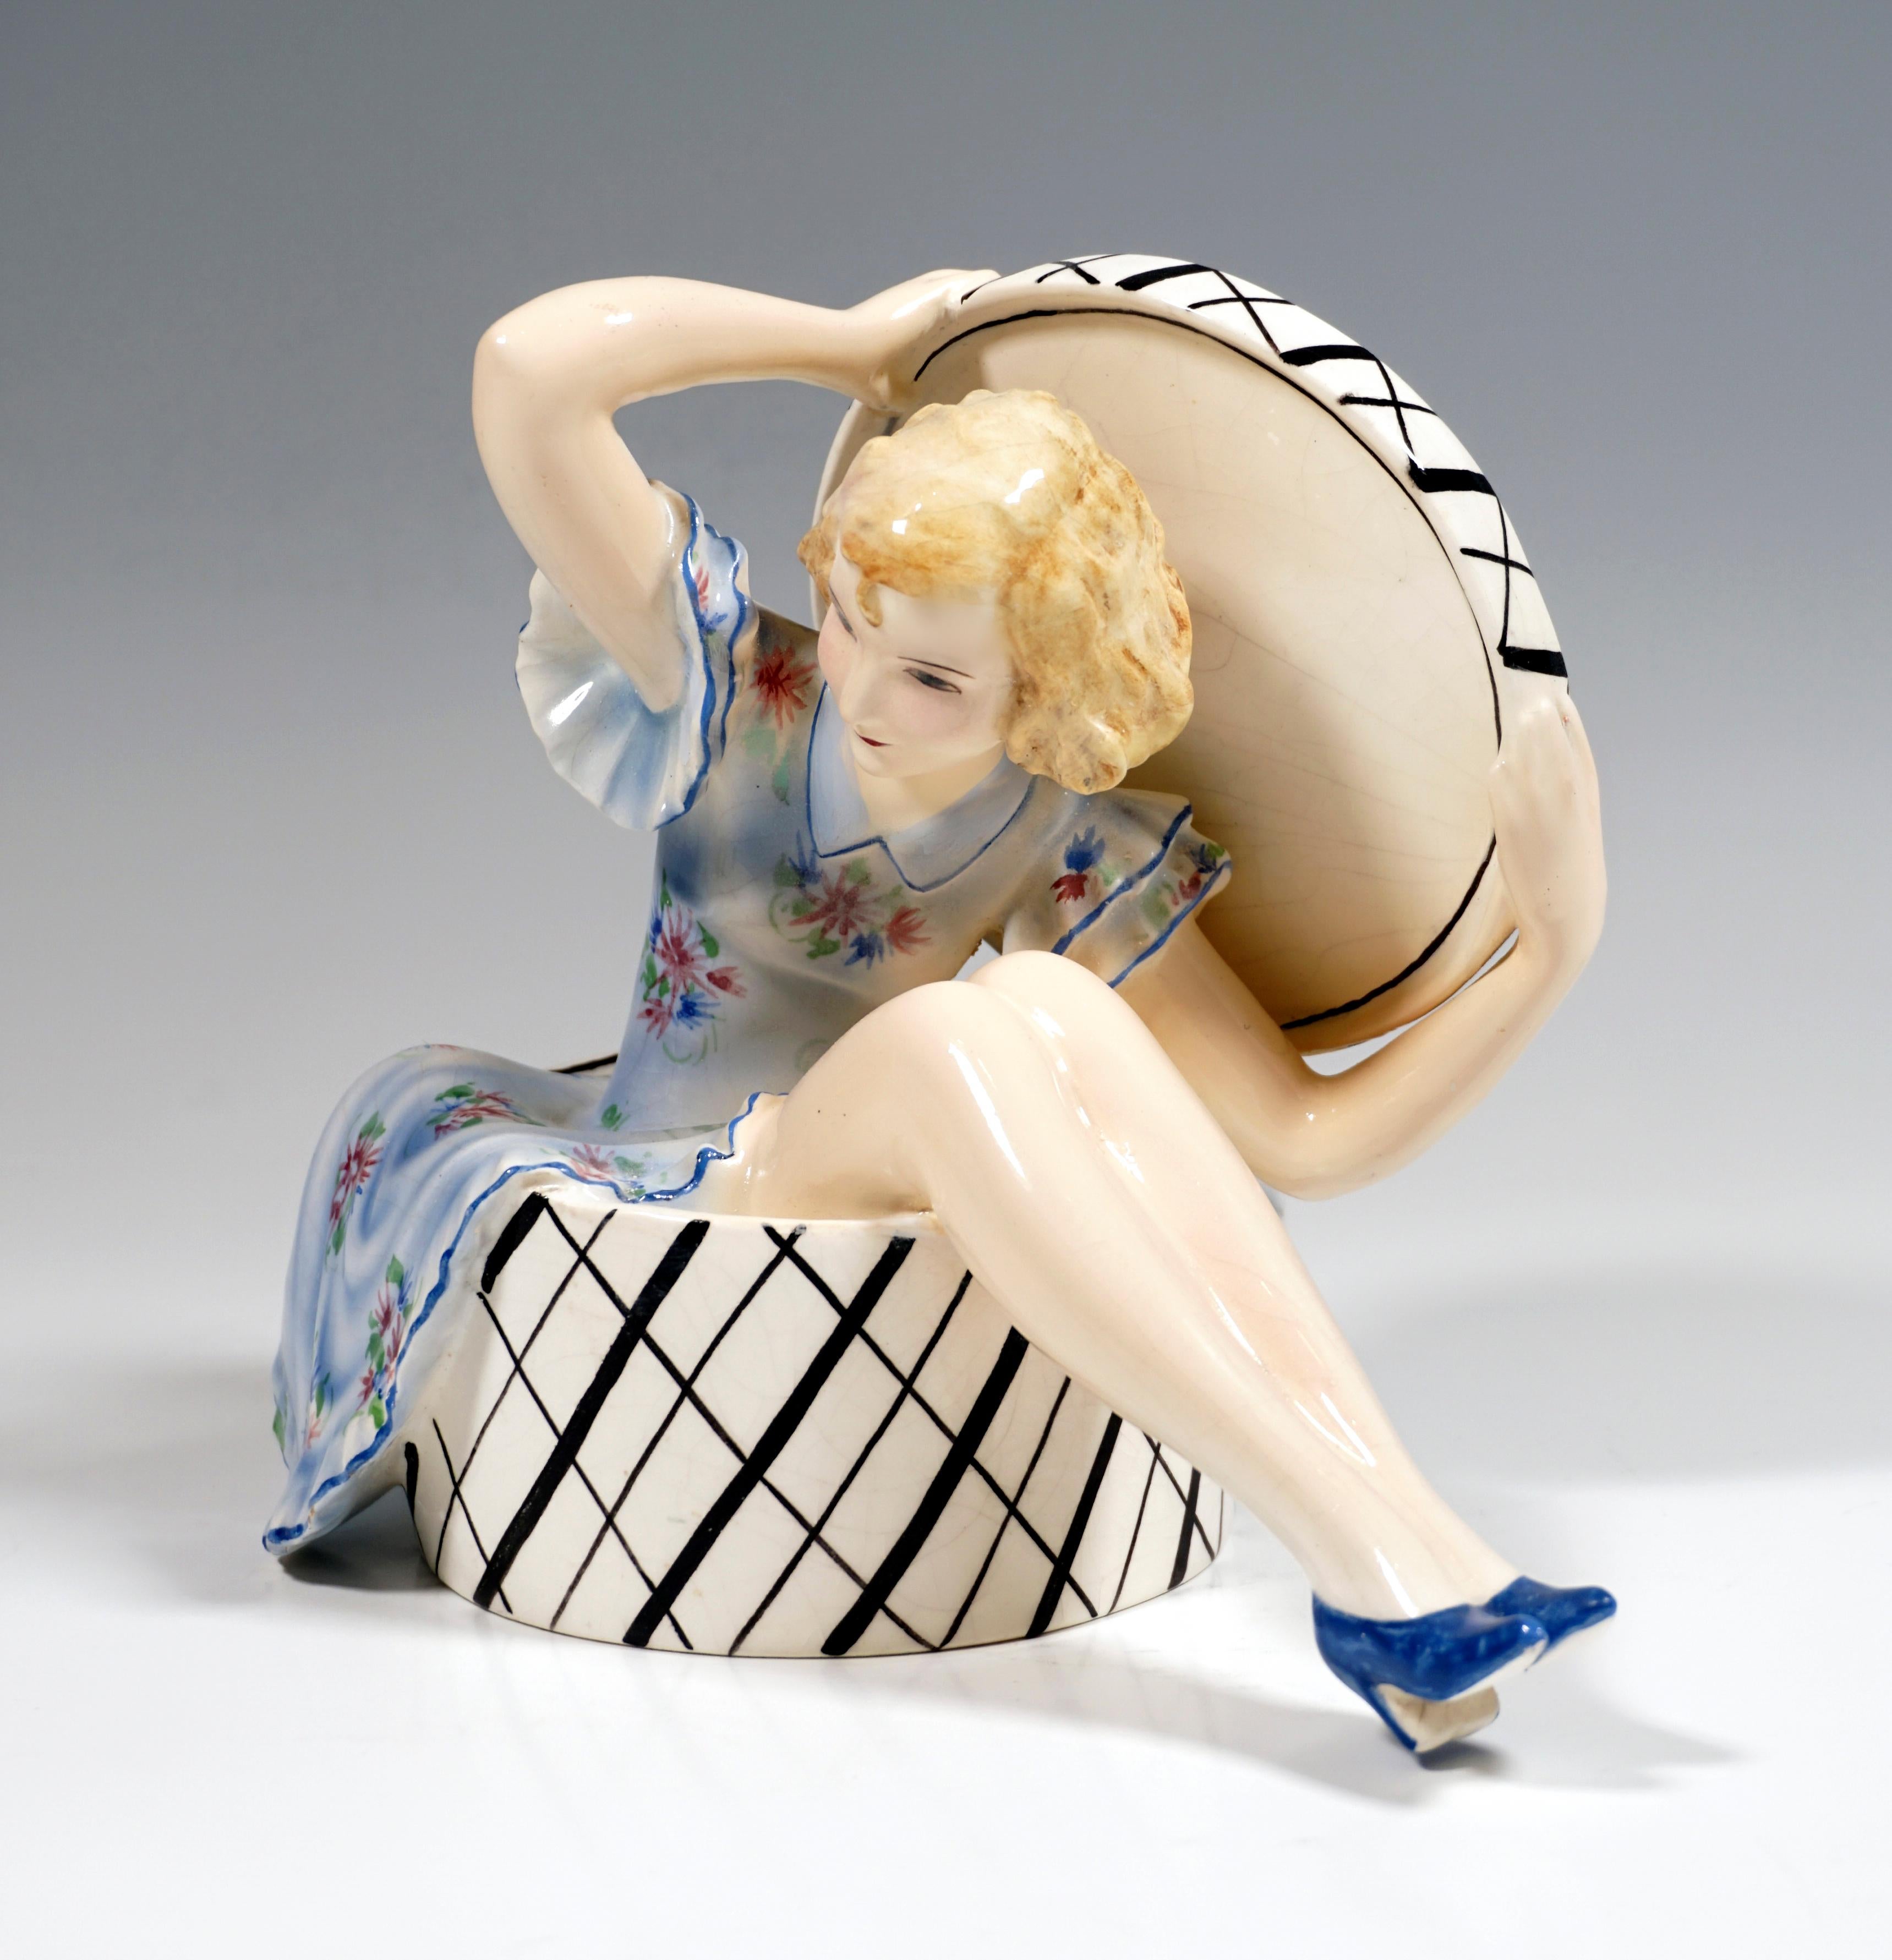 Very Rare Goldscheider Art Déco Ceramic Figurine.
A young lady with blond curly hair and a light blue, floral summer dress sitting in a large, white and black checkered hat box, leaning slightly forward, holding the lid up behind her with both